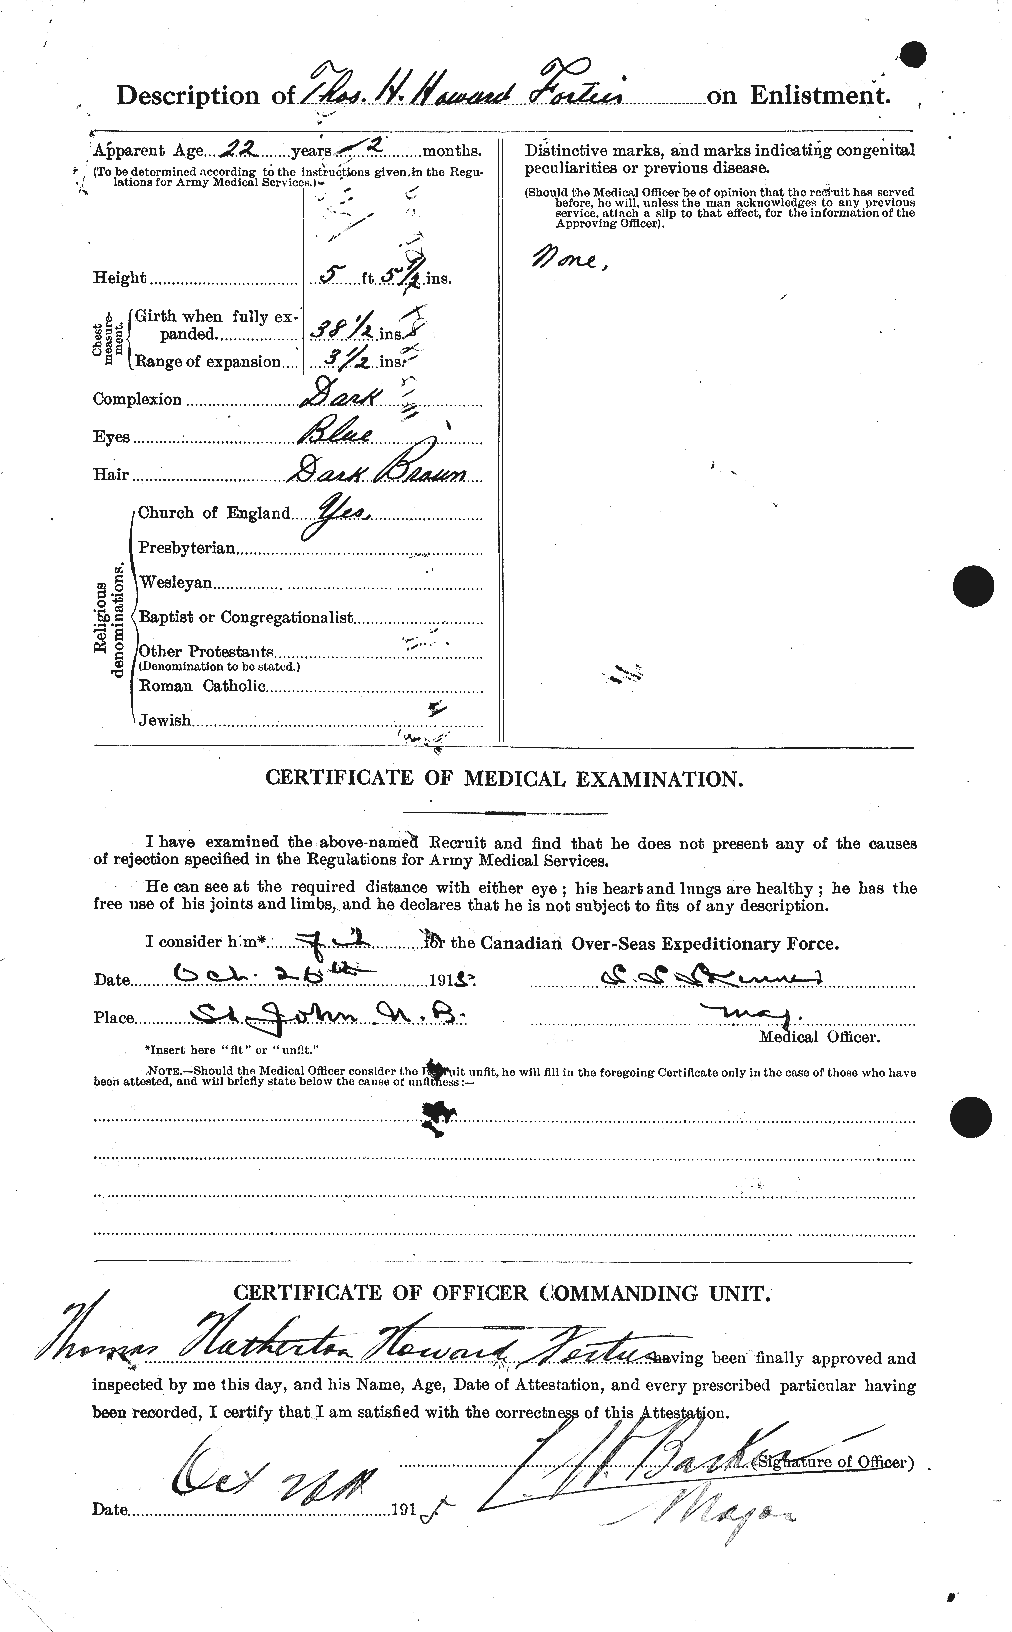 Personnel Records of the First World War - CEF 333622b